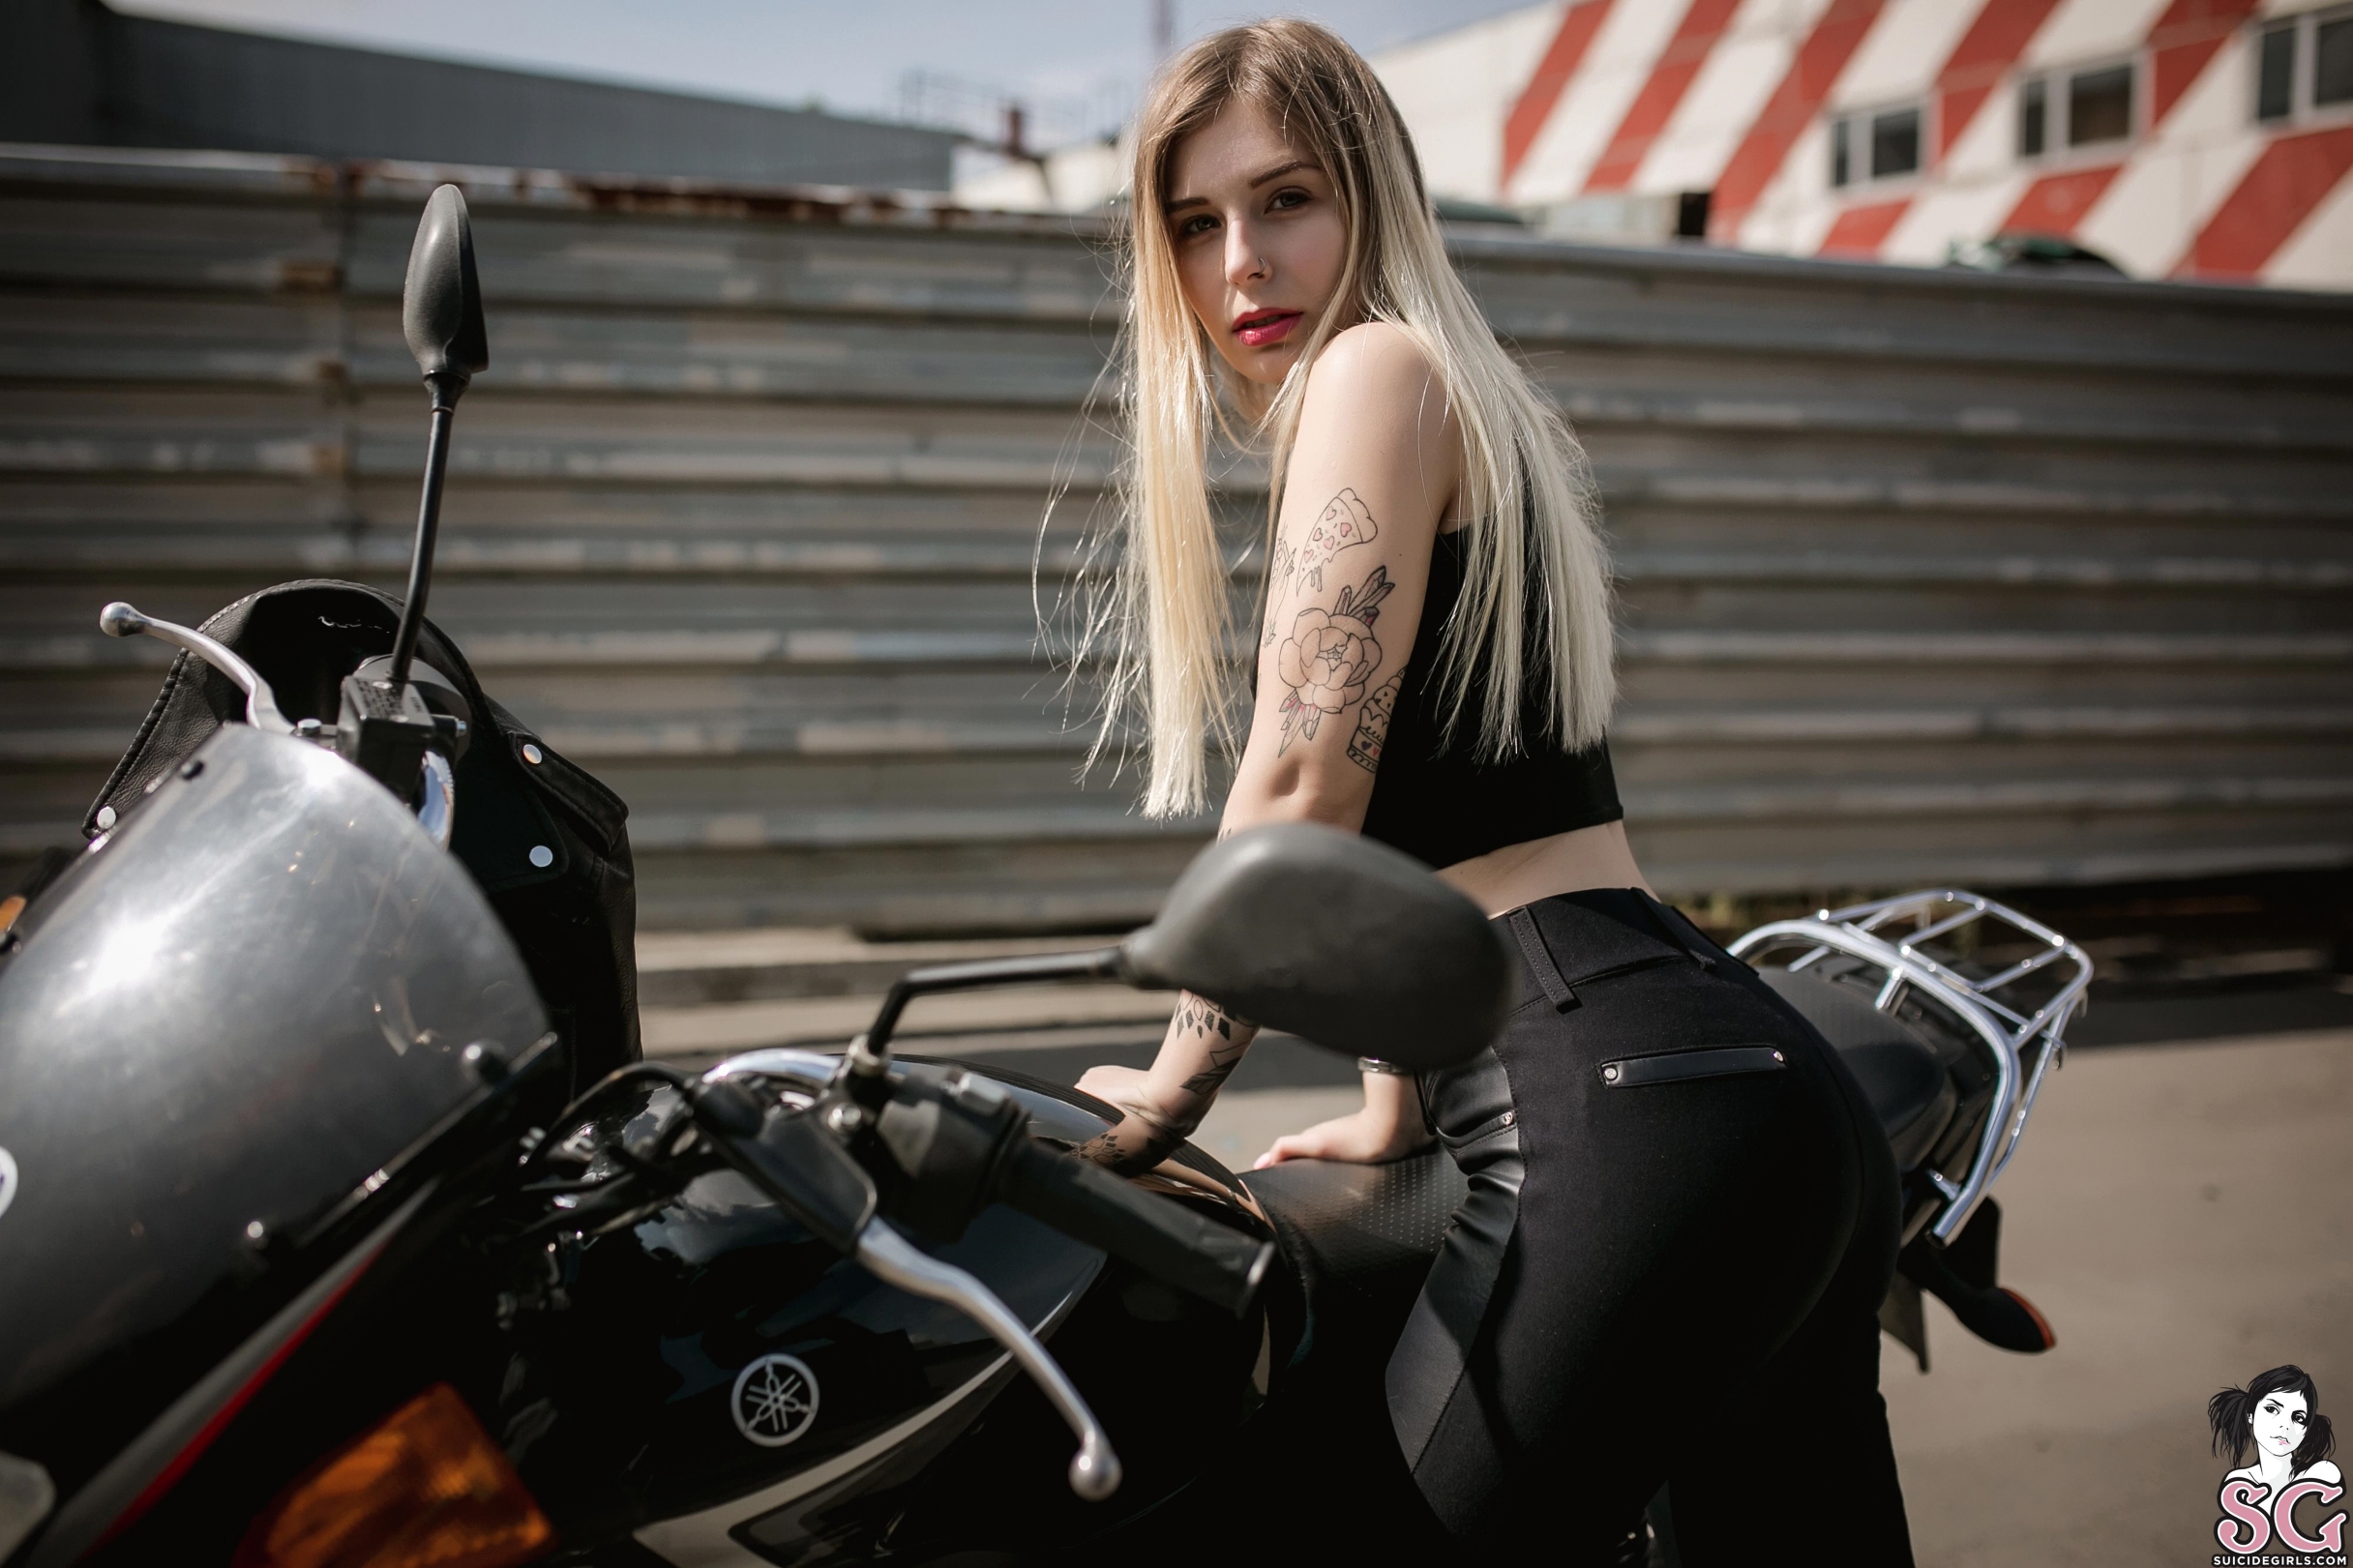 People 2432x1621 Valera women model blonde looking at viewer nose ring black top leather pants  women with motorcycles motorcycle vehicle tattoo outdoors street Suicide Girls